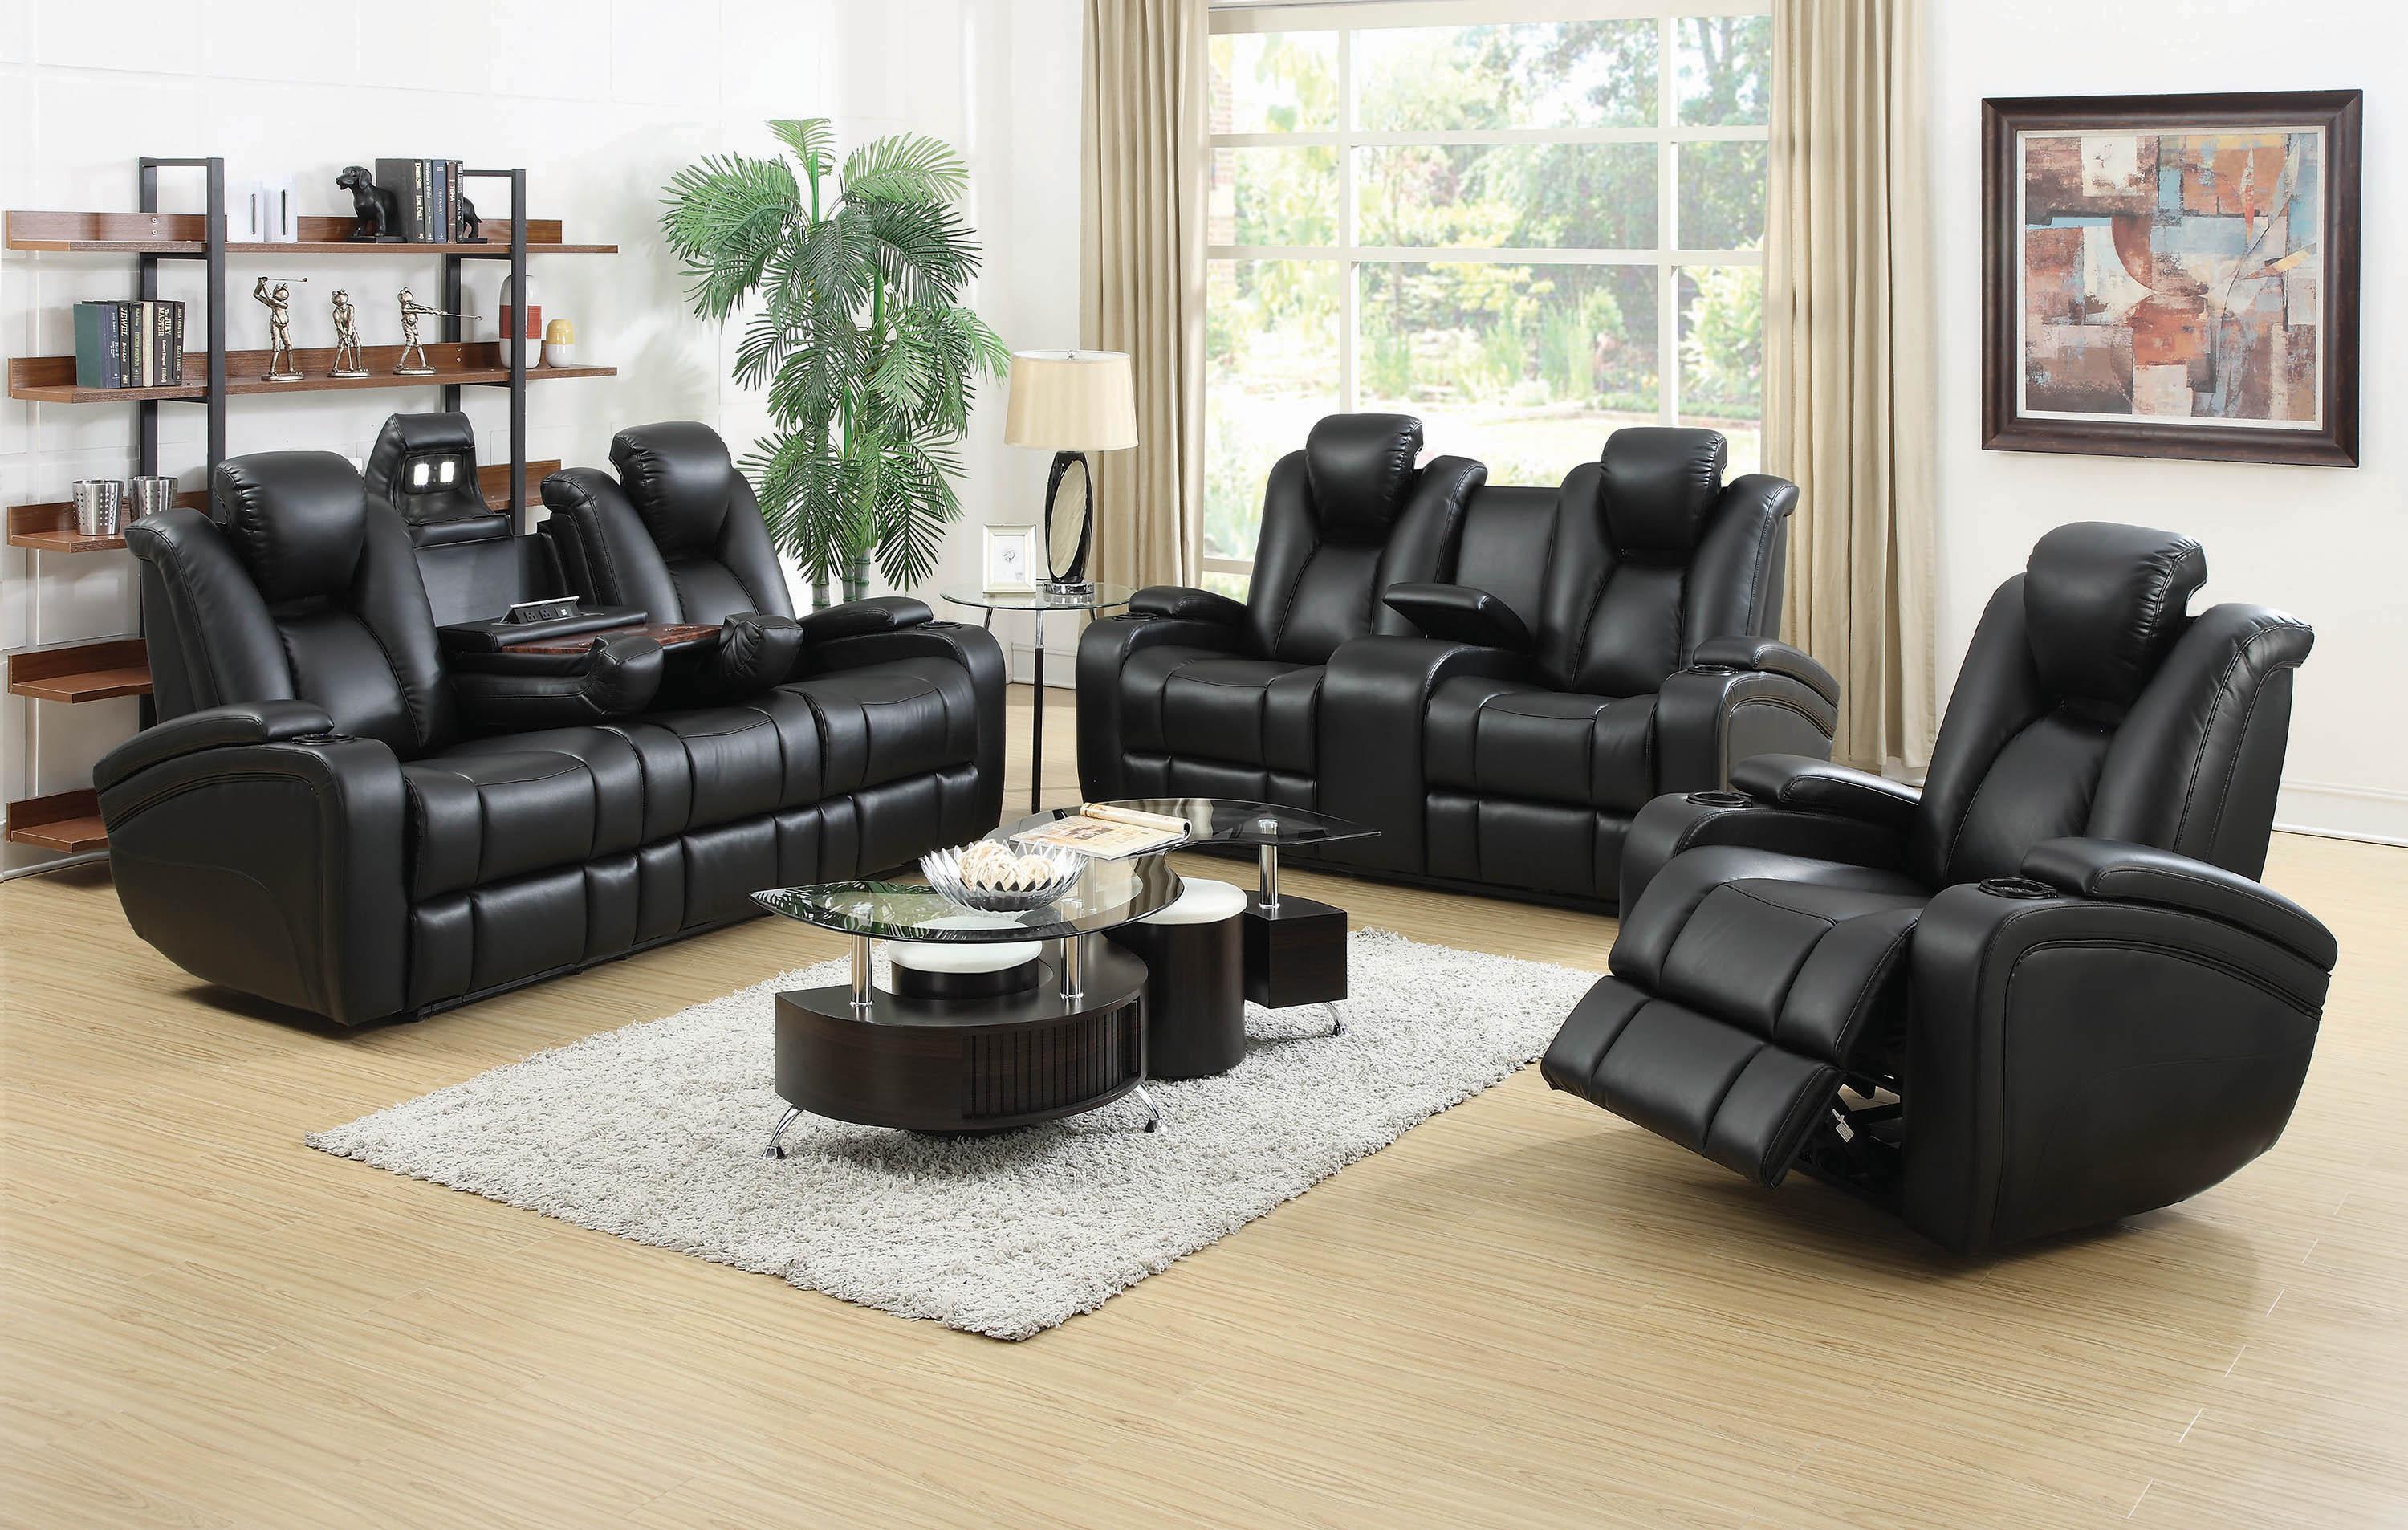 

    
Contemporary Black Leather Upholstery Power2 sofa Delange by Coaster
